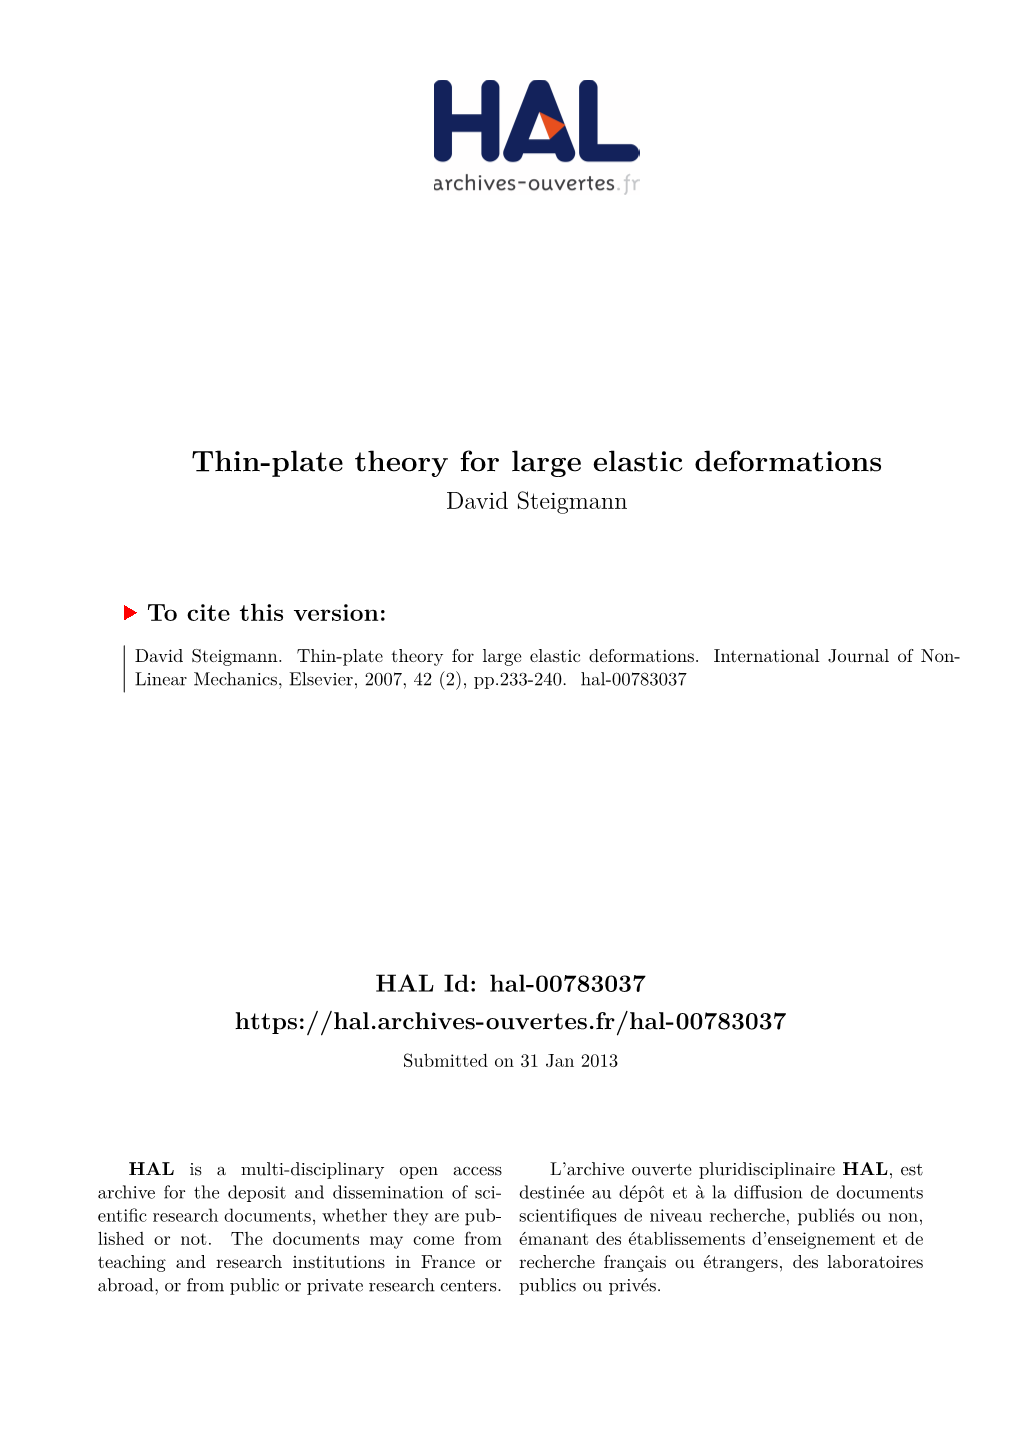 Thin-Plate Theory for Large Elastic Deformations David Steigmann